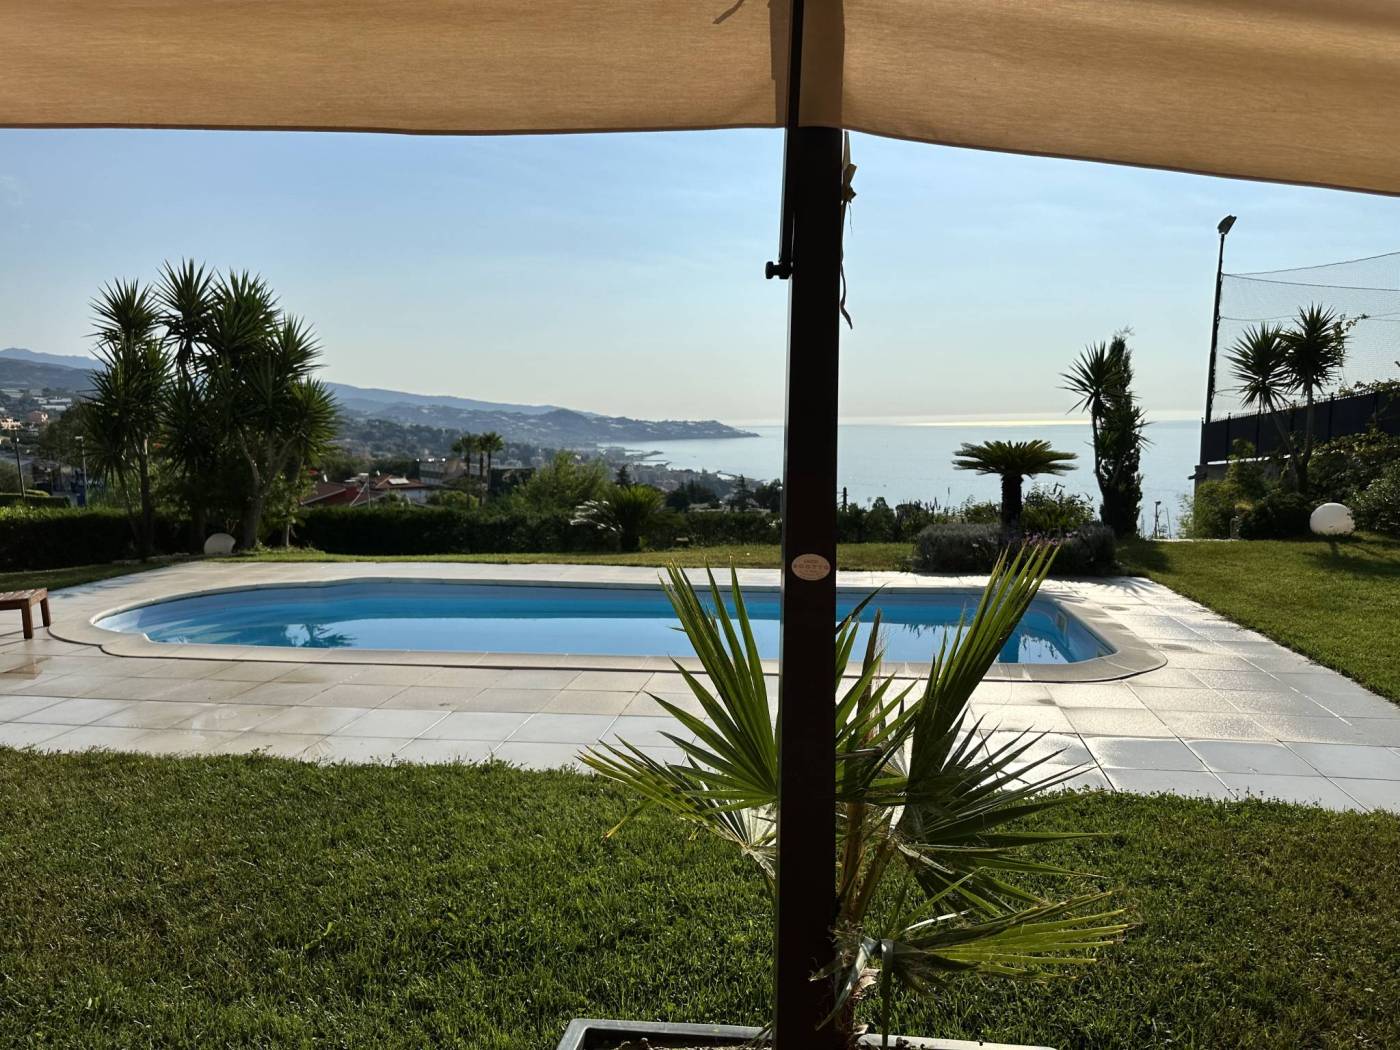 Stately Villa…Sanremo…. The Villa is a prestigious property located in the city of Sanremo. a few kilometers from the French border with the renowned 